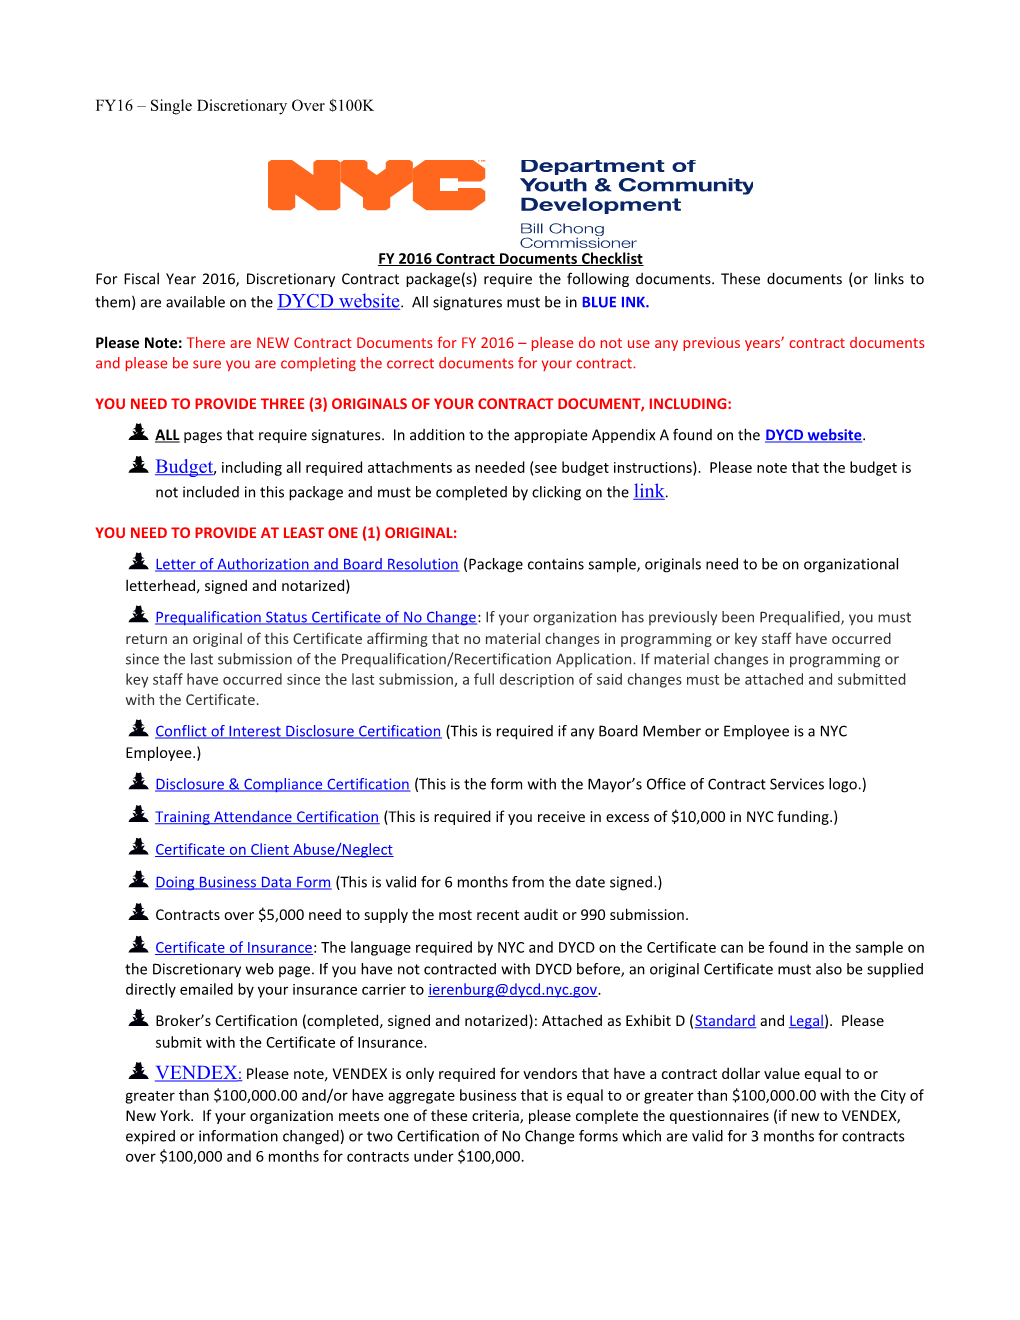 FY 2016 Contract Documents Checklist